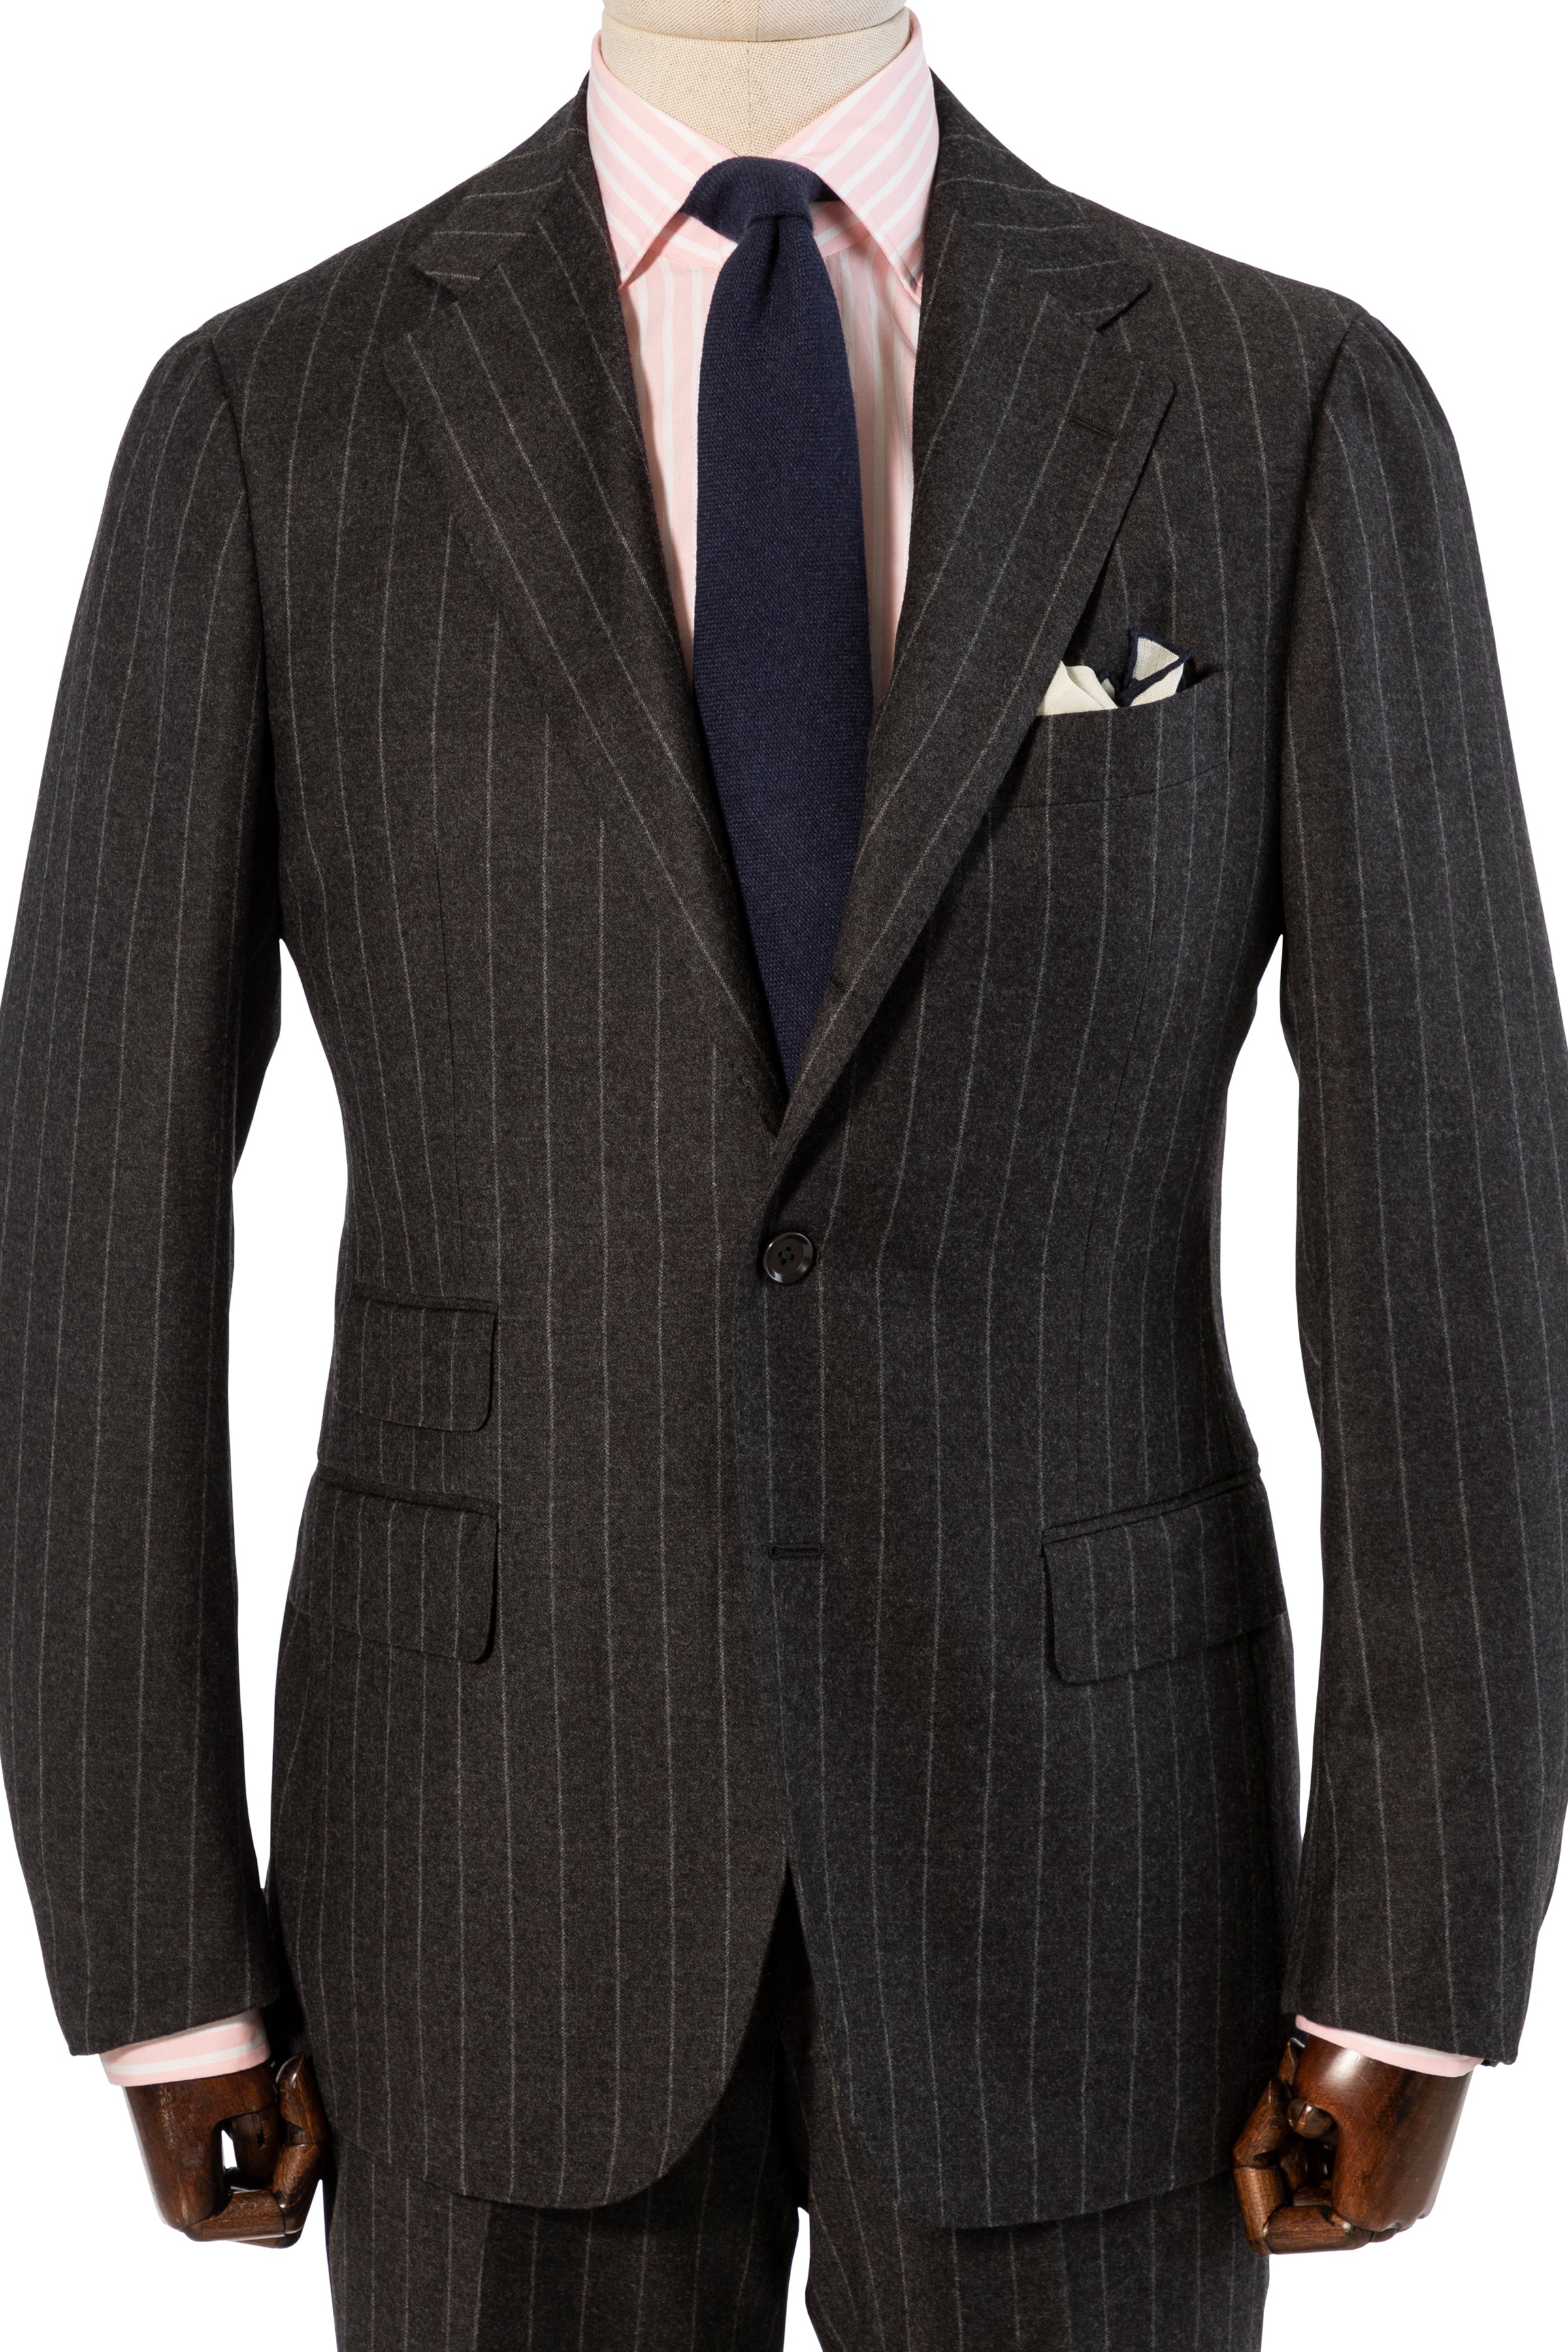 Dormeuil Green Pinstripe Suit by Knot Standard